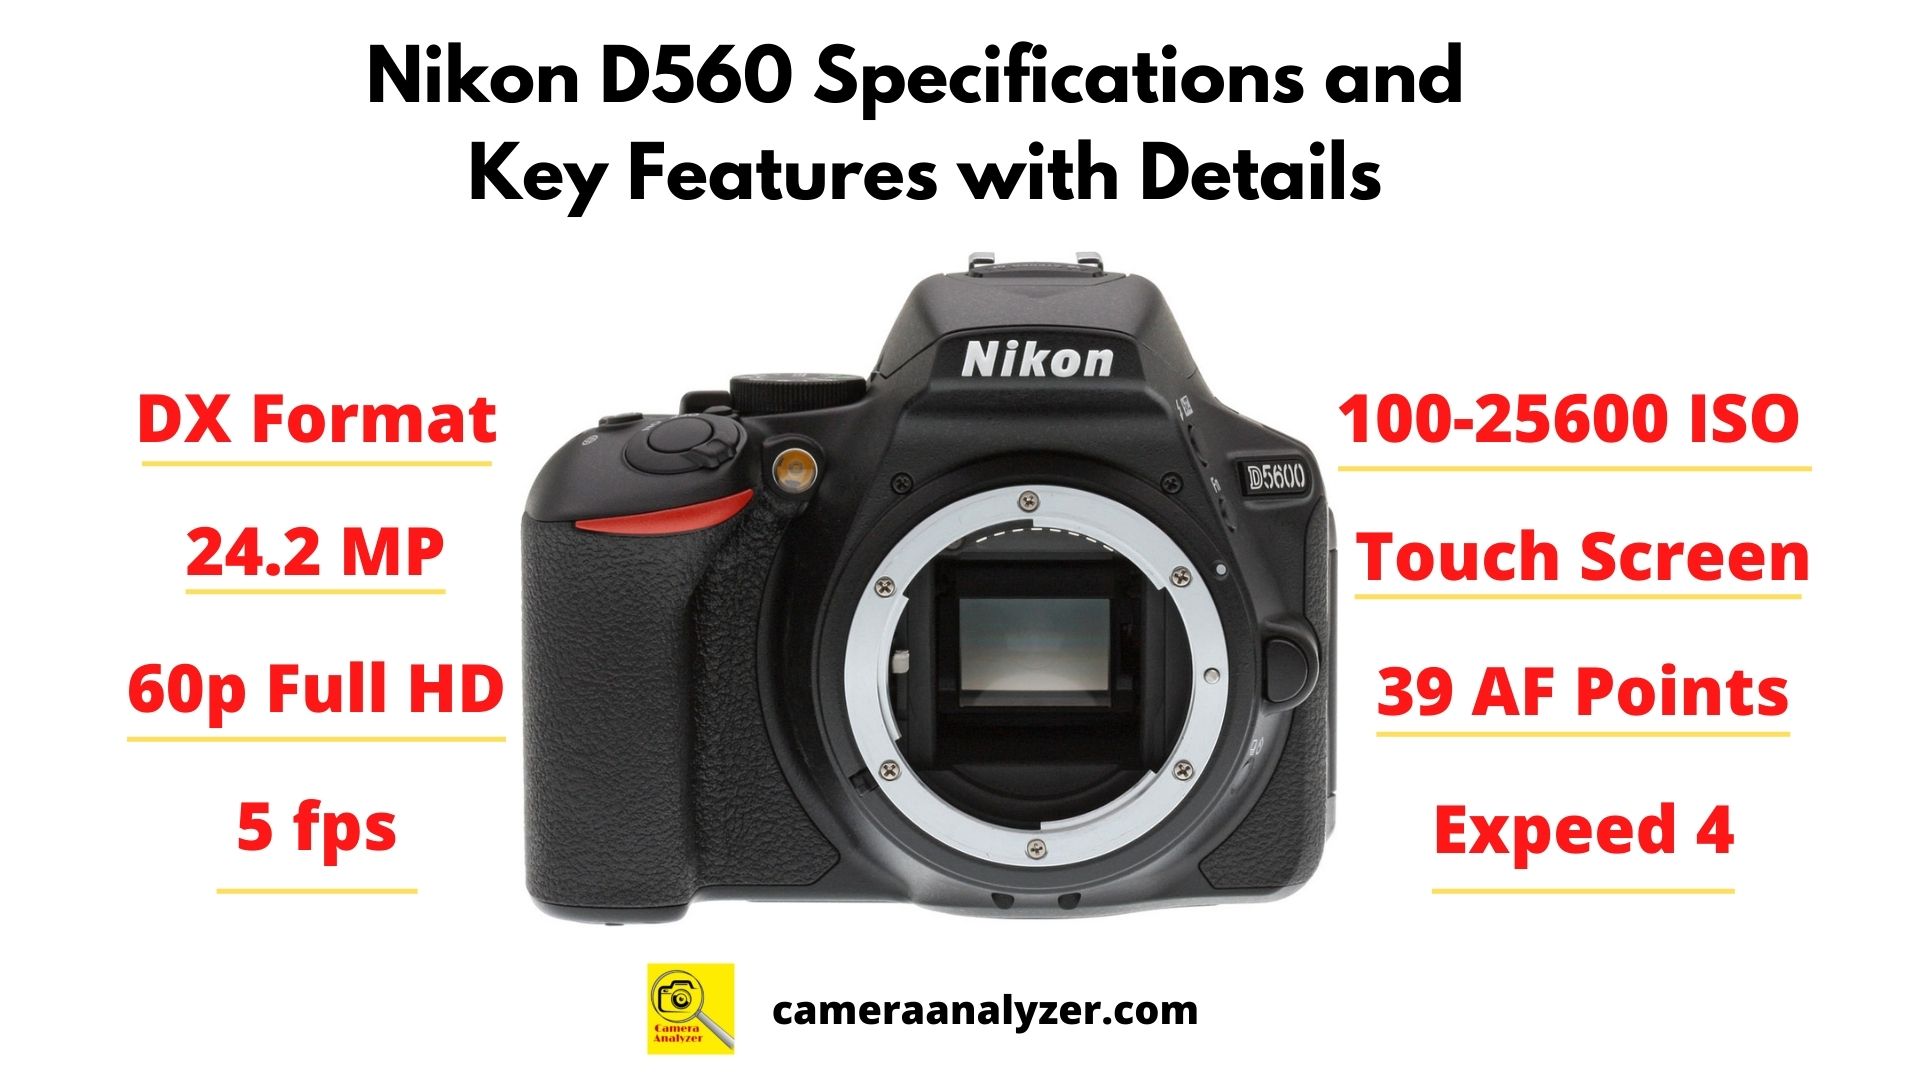 Nikon D5600 Specifications Key Features with Overview - Camera analyzer